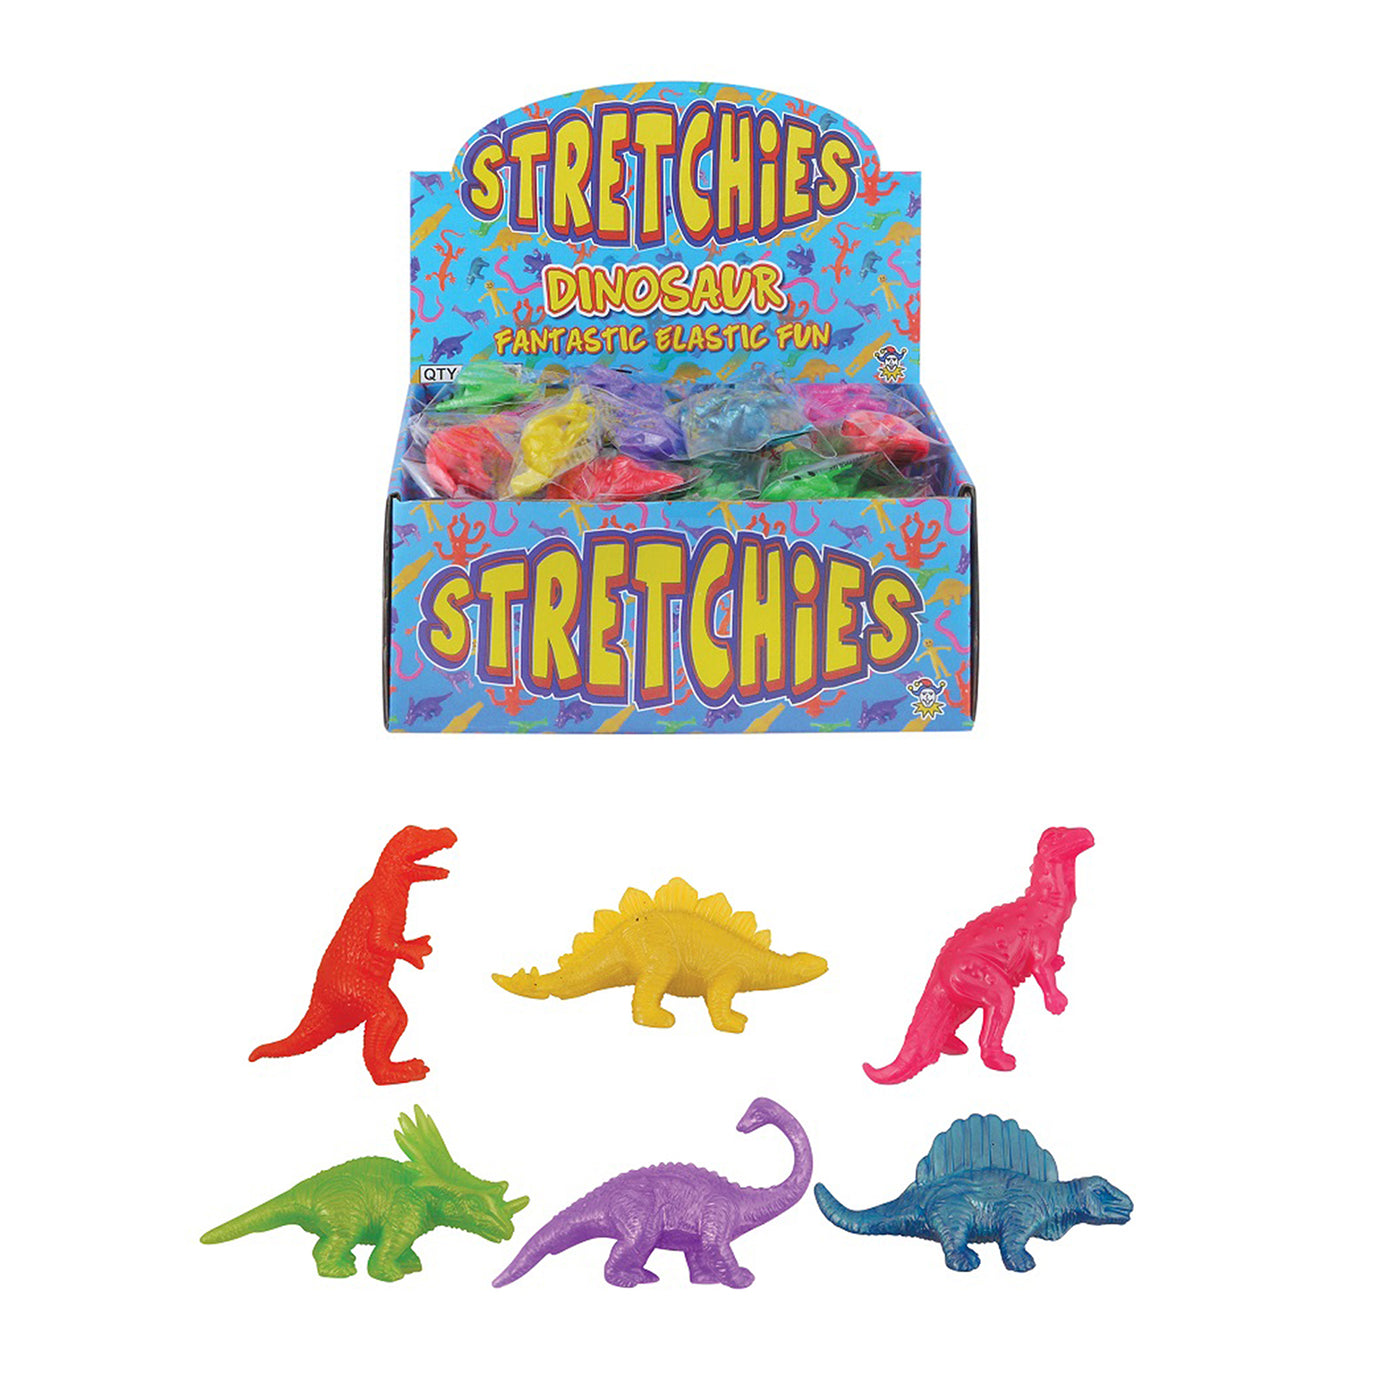 Colourful Pre Filled Dinosaur Loot Bags With Toys And Candy For Children. Party Favours.